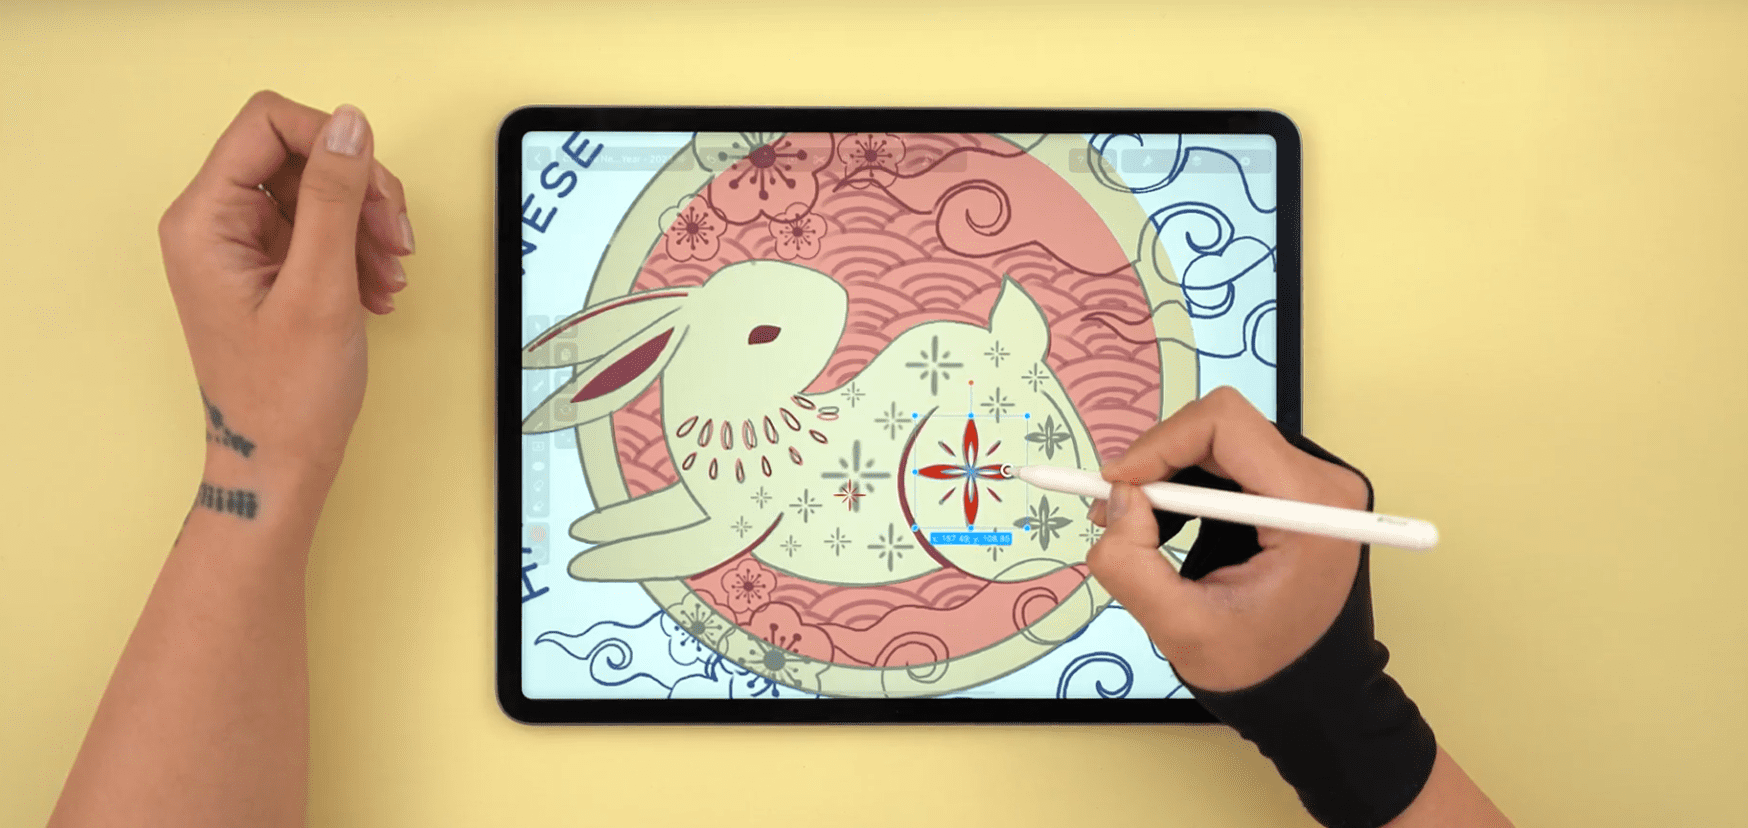 Hand drawing a rabbit with a floral pattern on a digital tablet